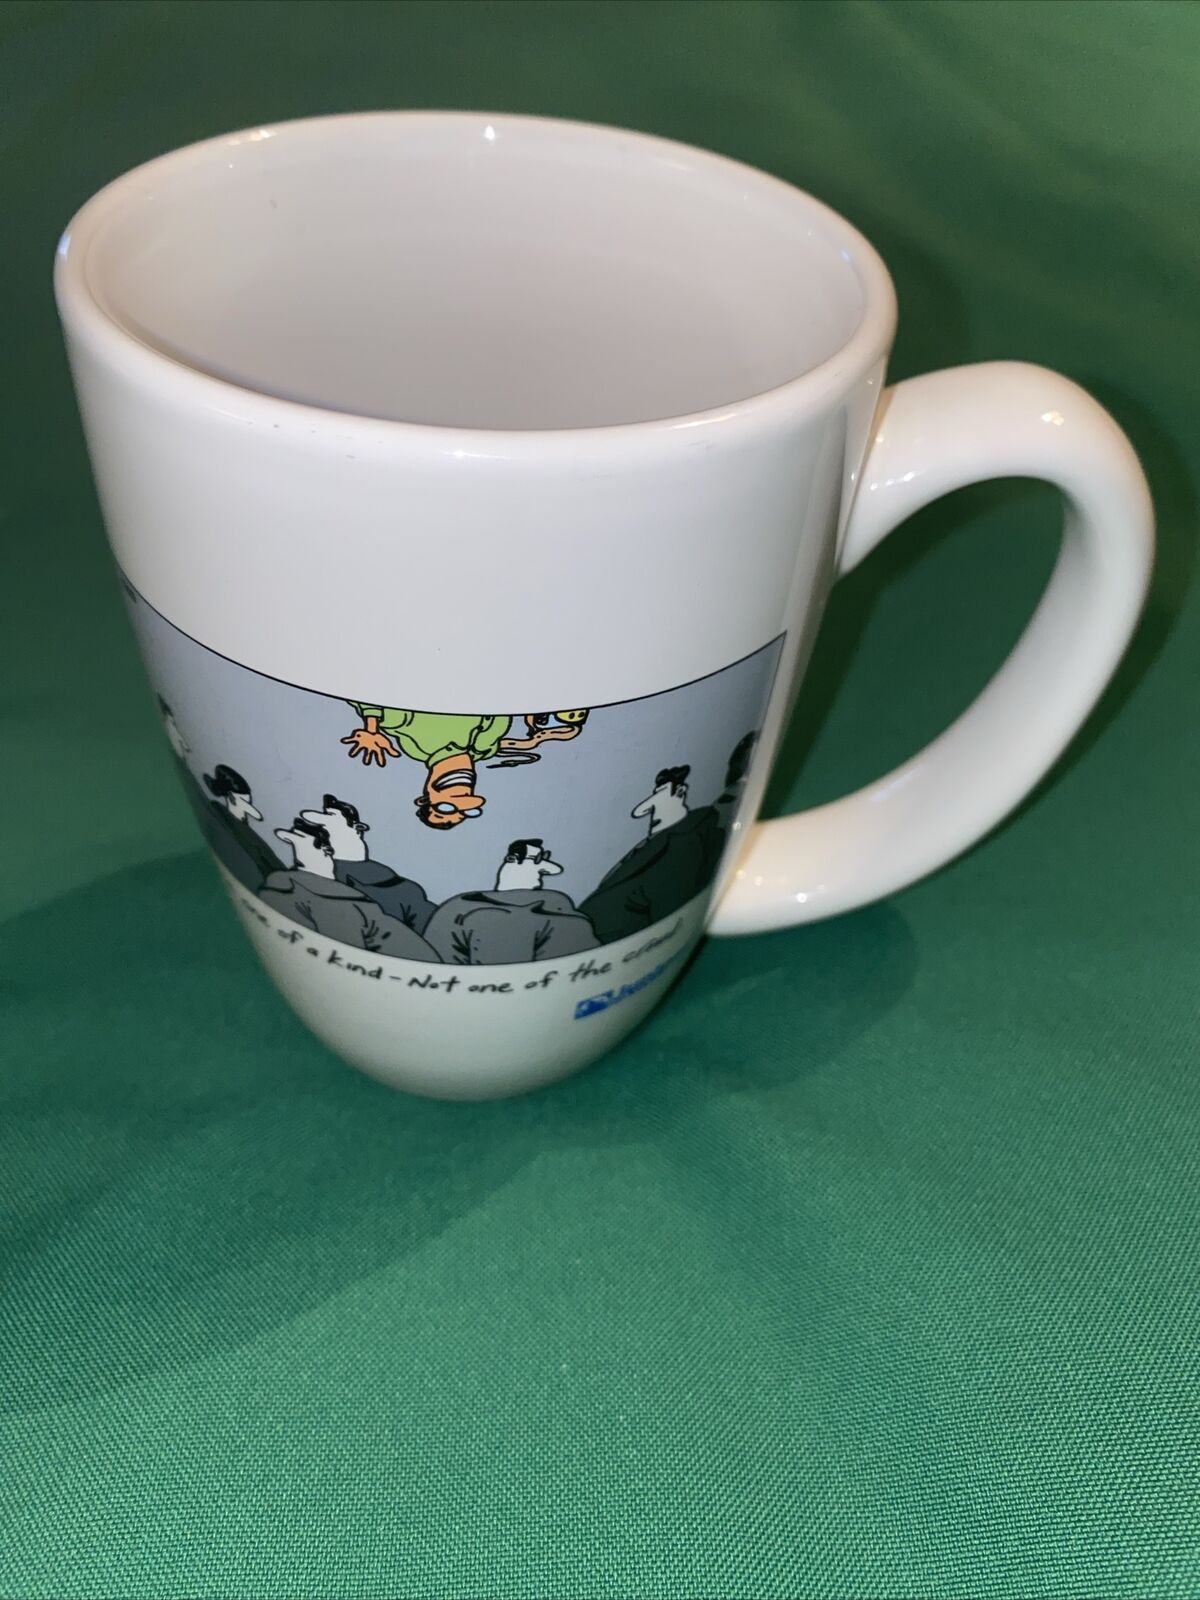 Rare Juniper Networks Mug “you’re One Of A Kind, Not One Of The Crowd” Cartoon